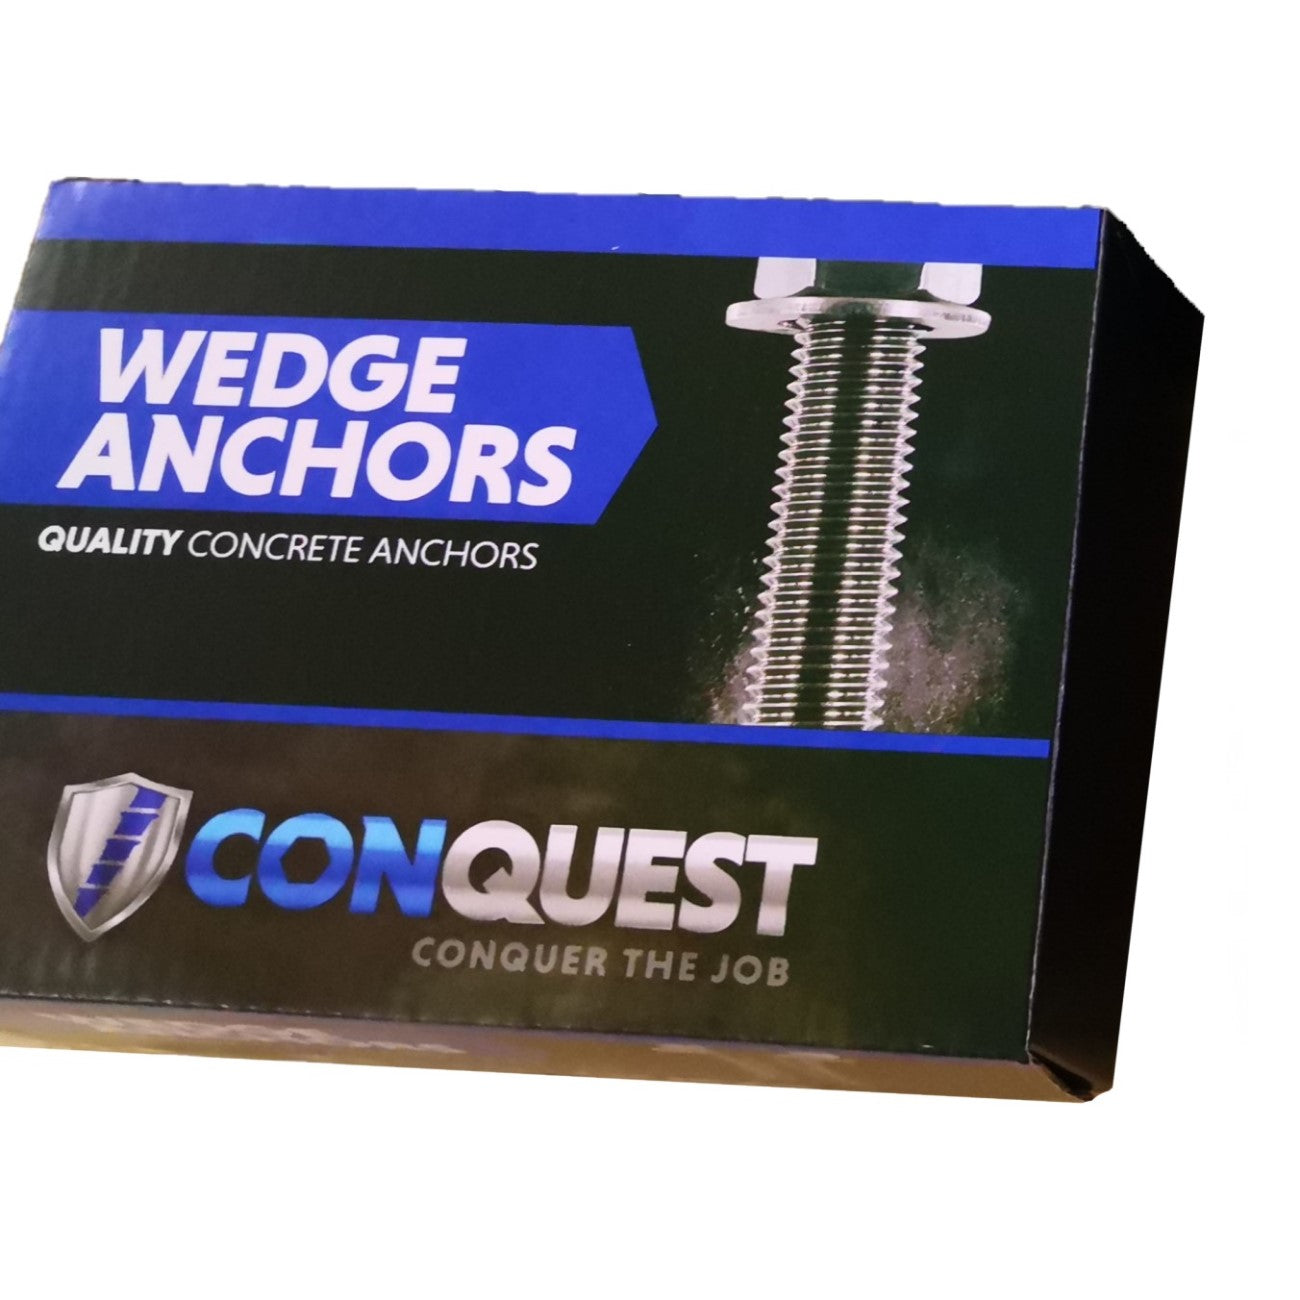 1/4" x 1-3/4" Conquest Wedge Anchors - 316 Stainless Steel, Pkg 100